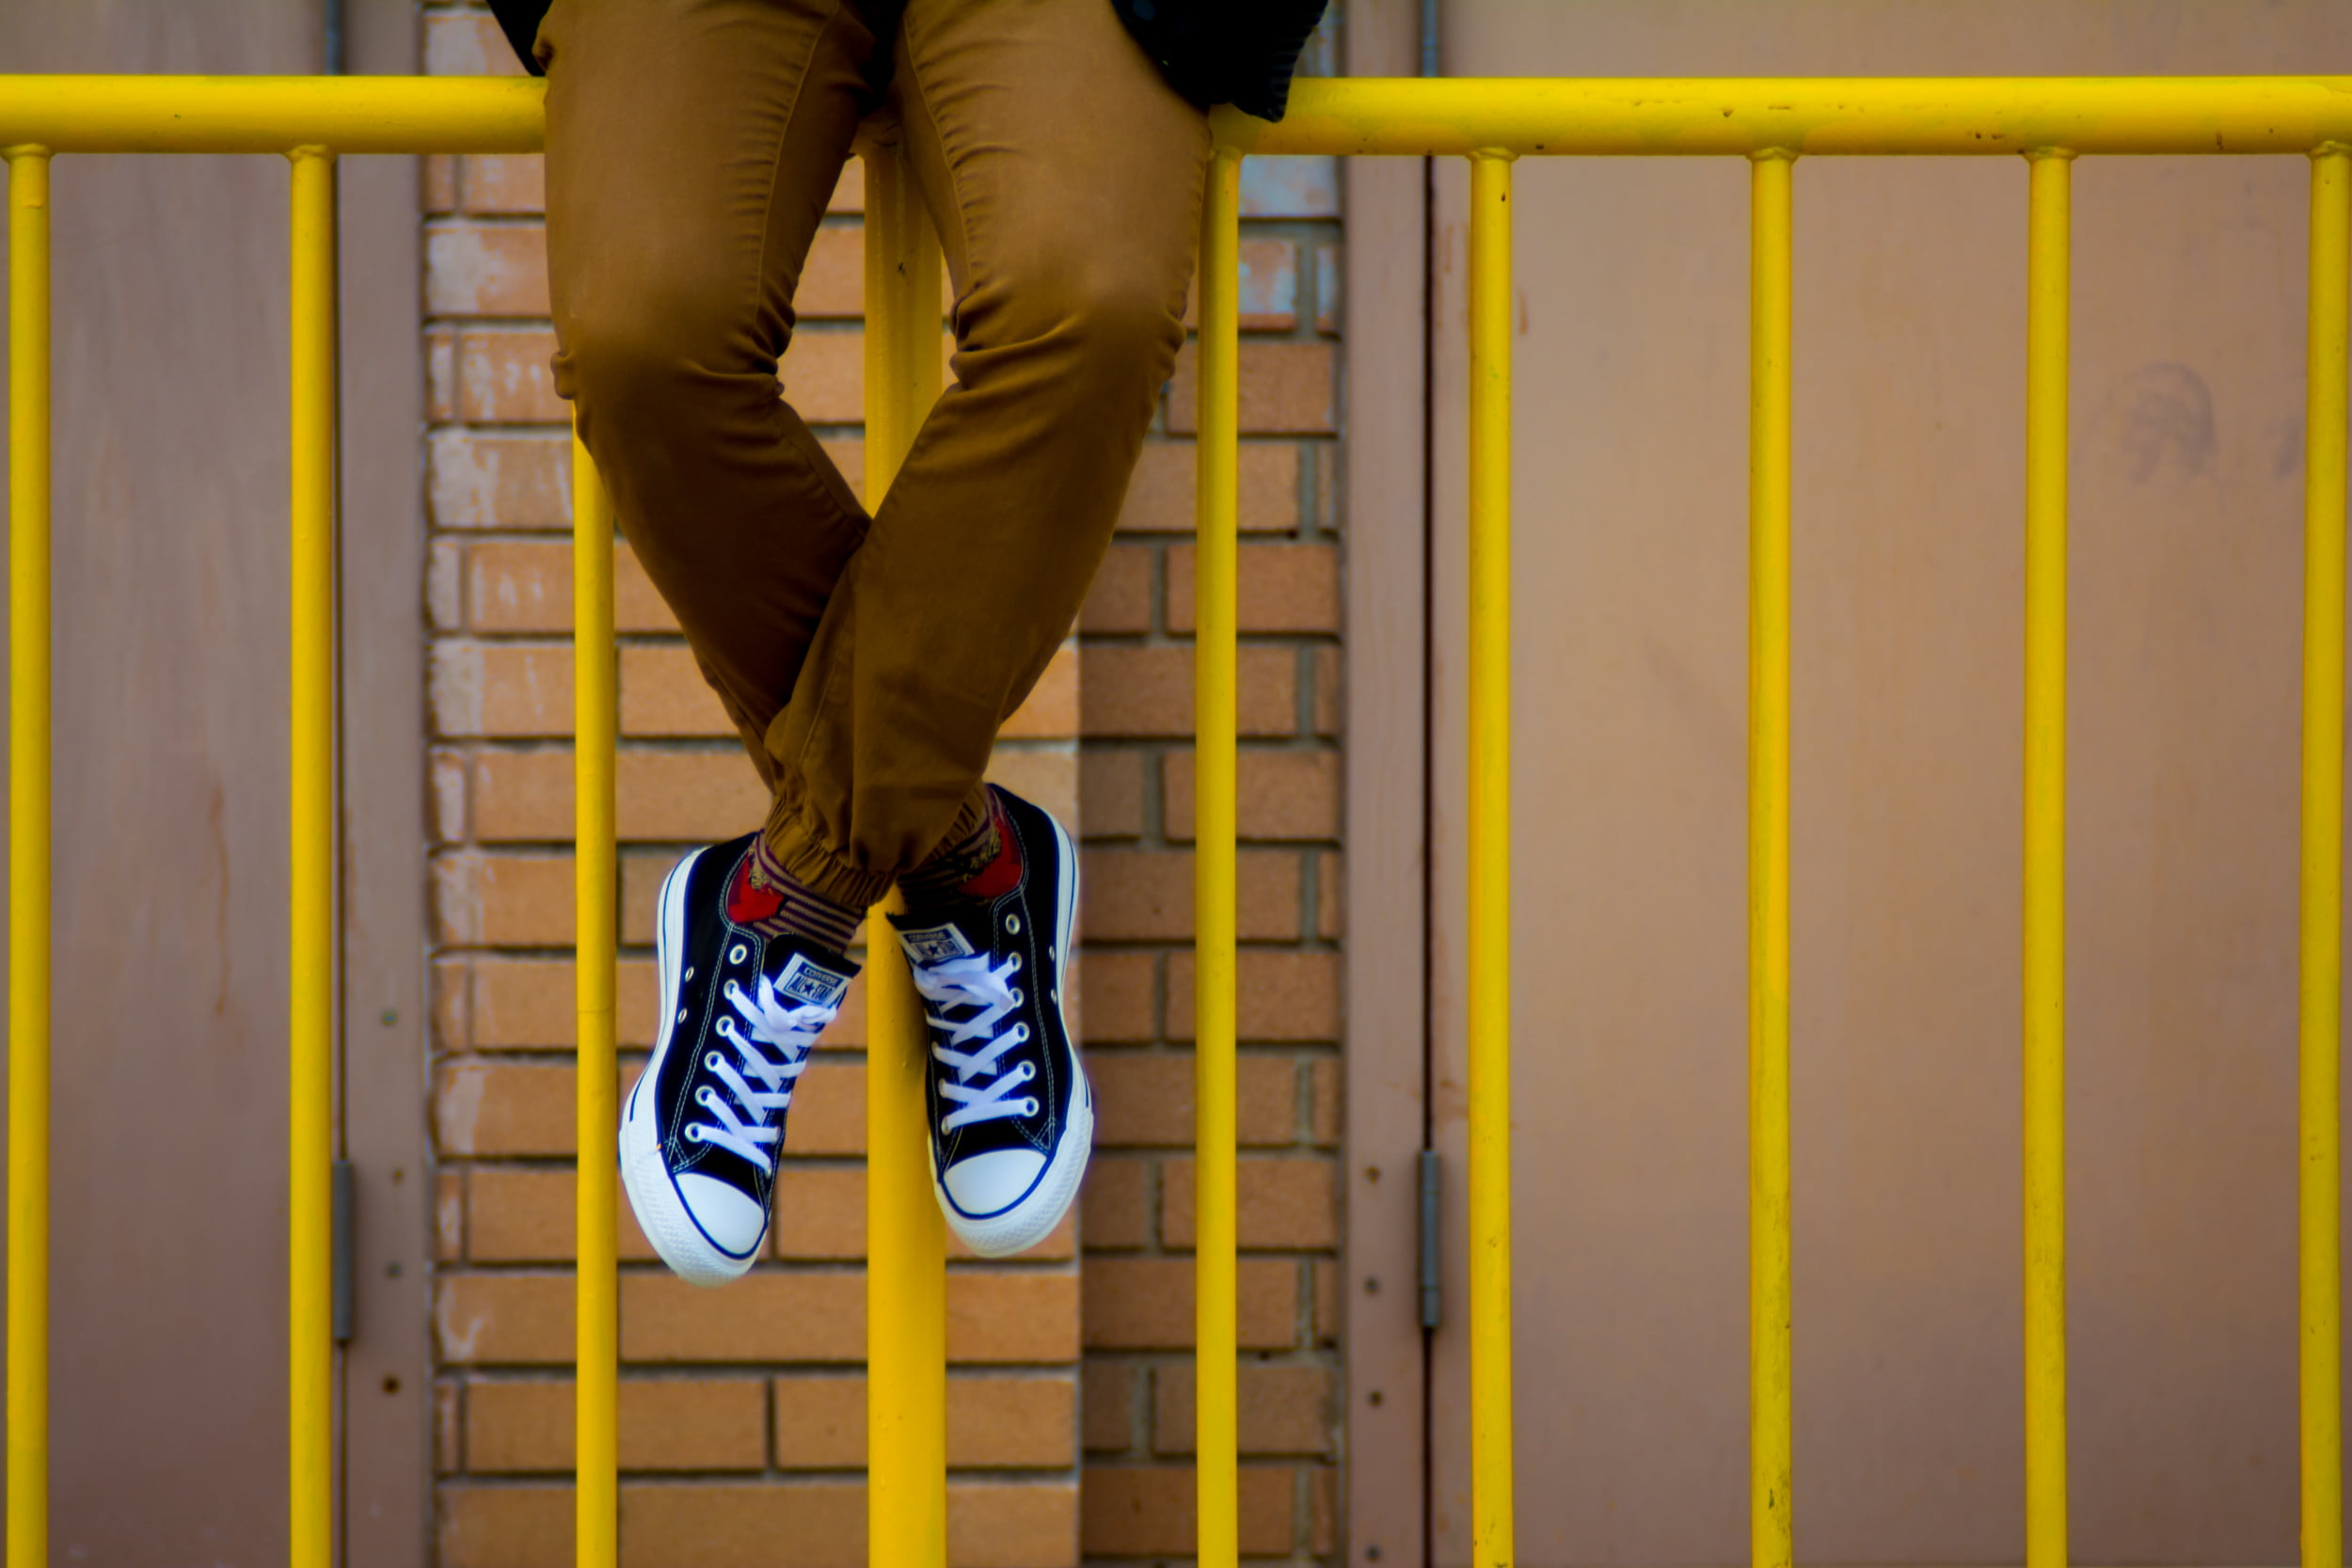 Person in black pants and white converse all star high top sneakers photo –  Free Shoe Image on Unsplash